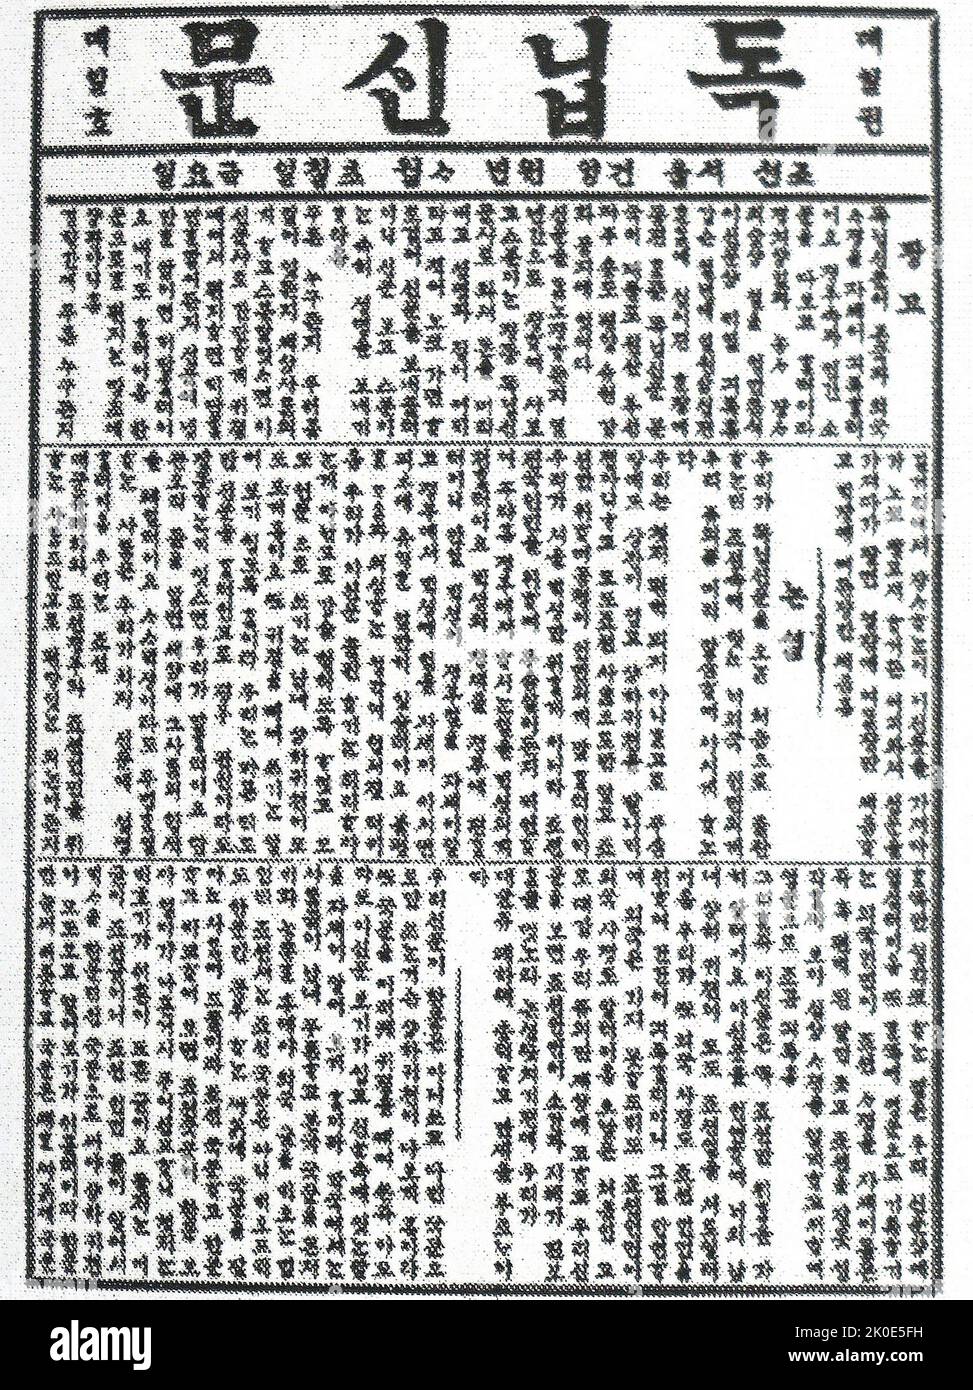 First edition of the Independent or Tongnip Sinmun (1896-1899), early Korean newspaper. Tongnip Sinmun was the first privately managed modern daily newspaper in Korea. It was founded in July 1896 by a member of the enlightened Korean intelligentsia, Seo Jae-pil. Stock Photo